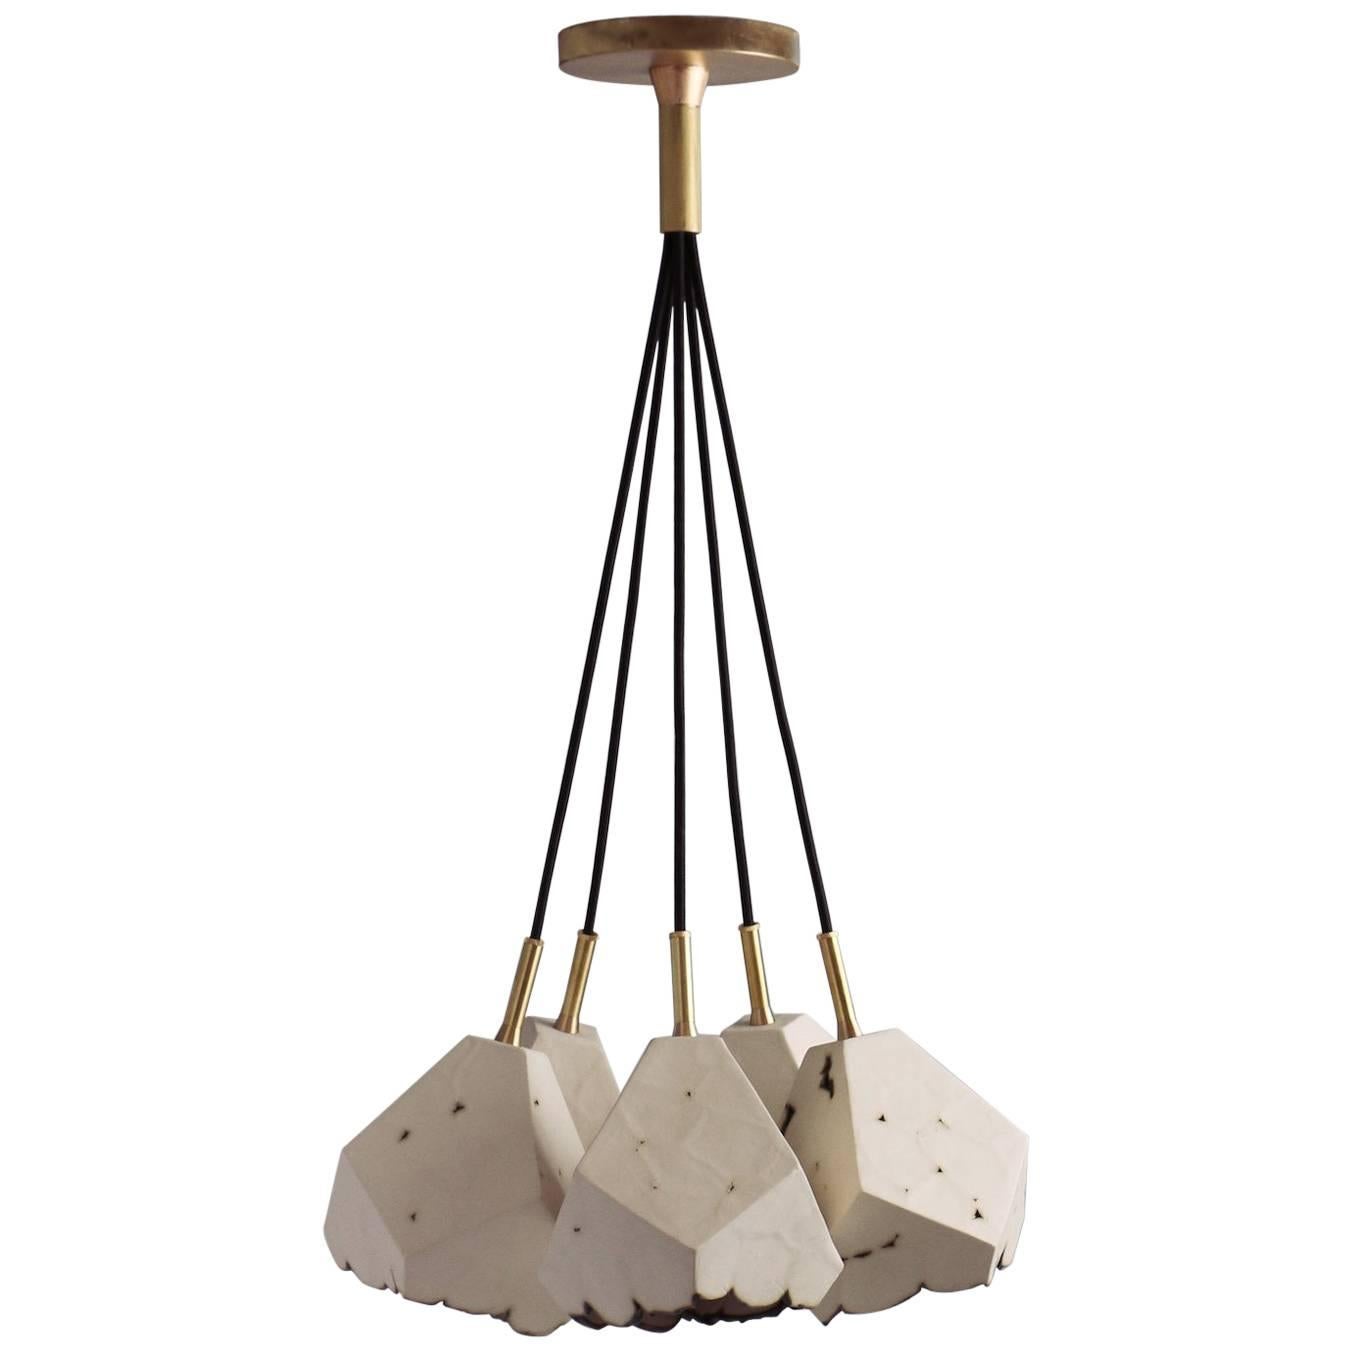 Relic 5 - Geometric White Porcelain and Brass Chandelier For Sale